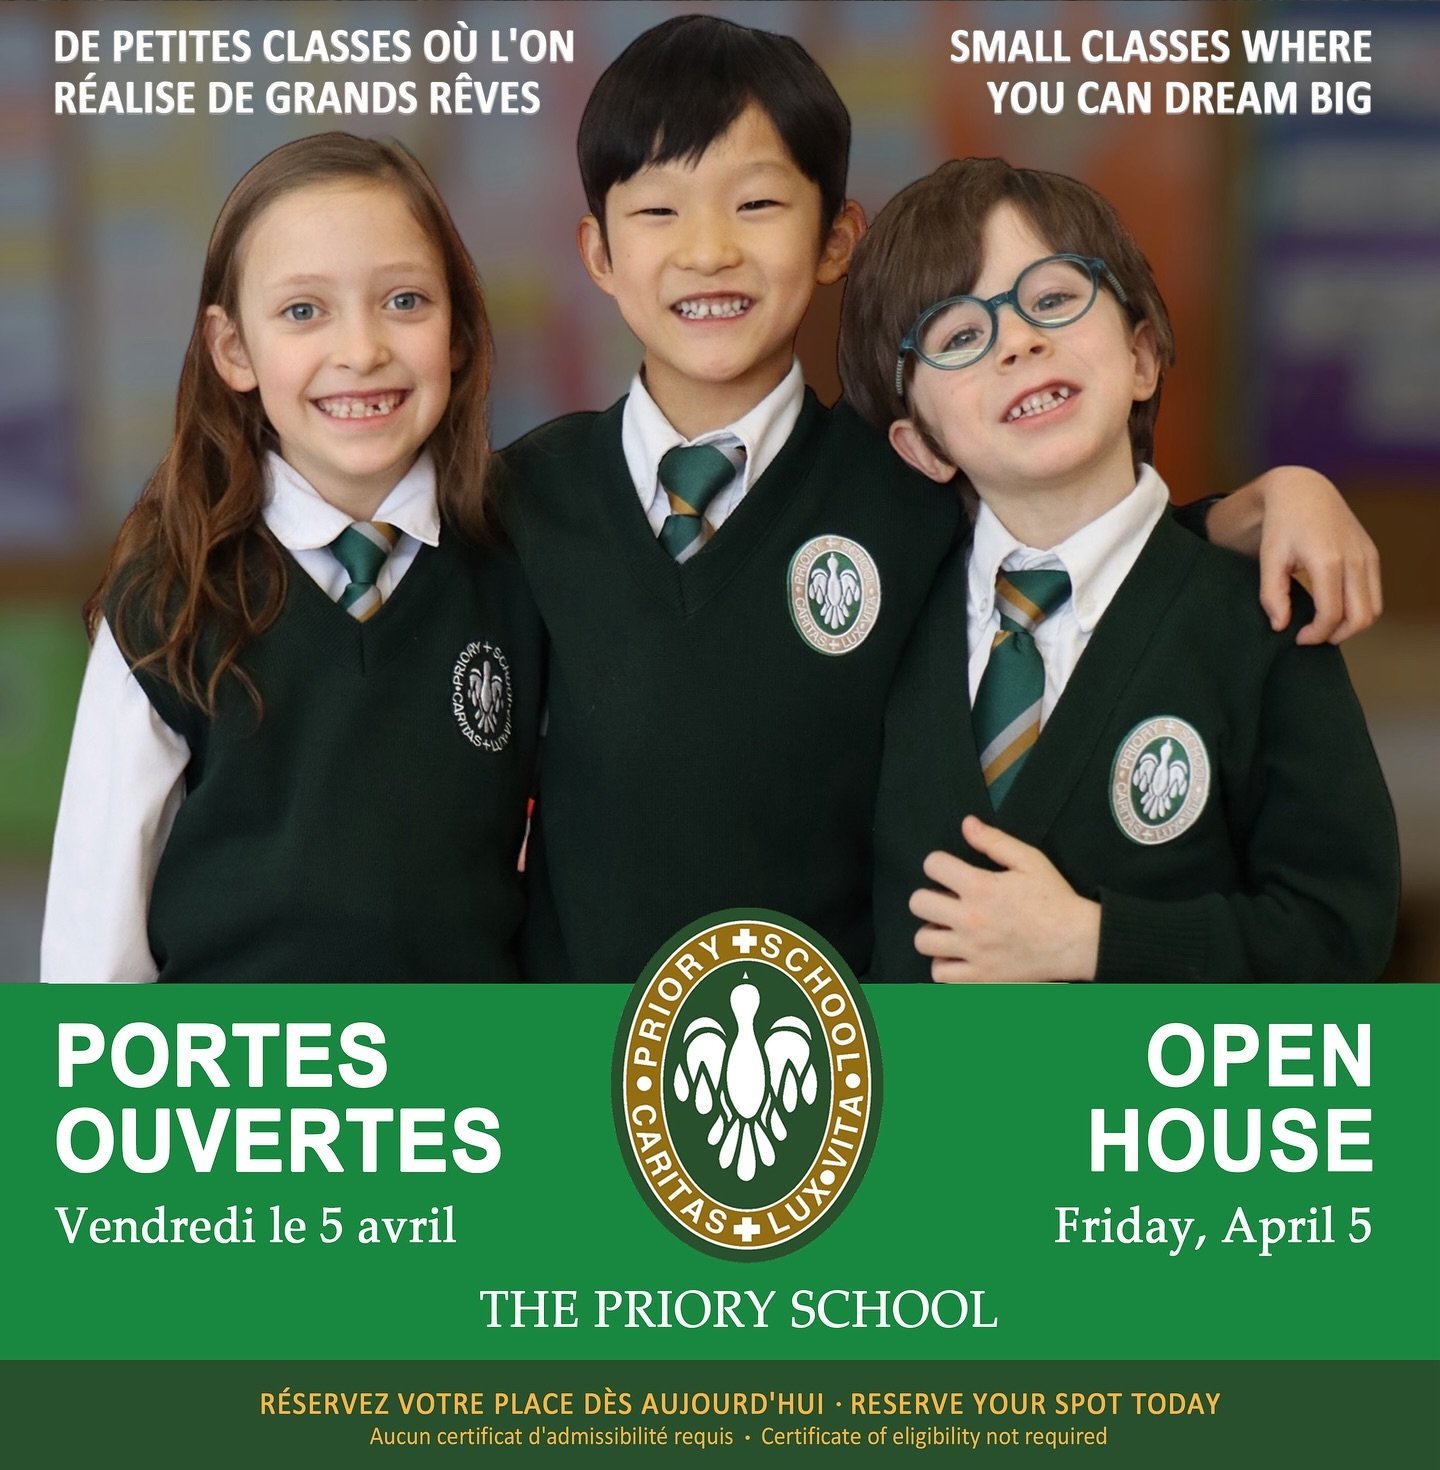 At The Priory School, &lsquo;Small Classes, Big Dreams&rsquo; is about more than just size&mdash;it&rsquo;s an educational journey where confidence, creativity, and curiosity flourish within a caring community.

Discover The Priory difference firstha